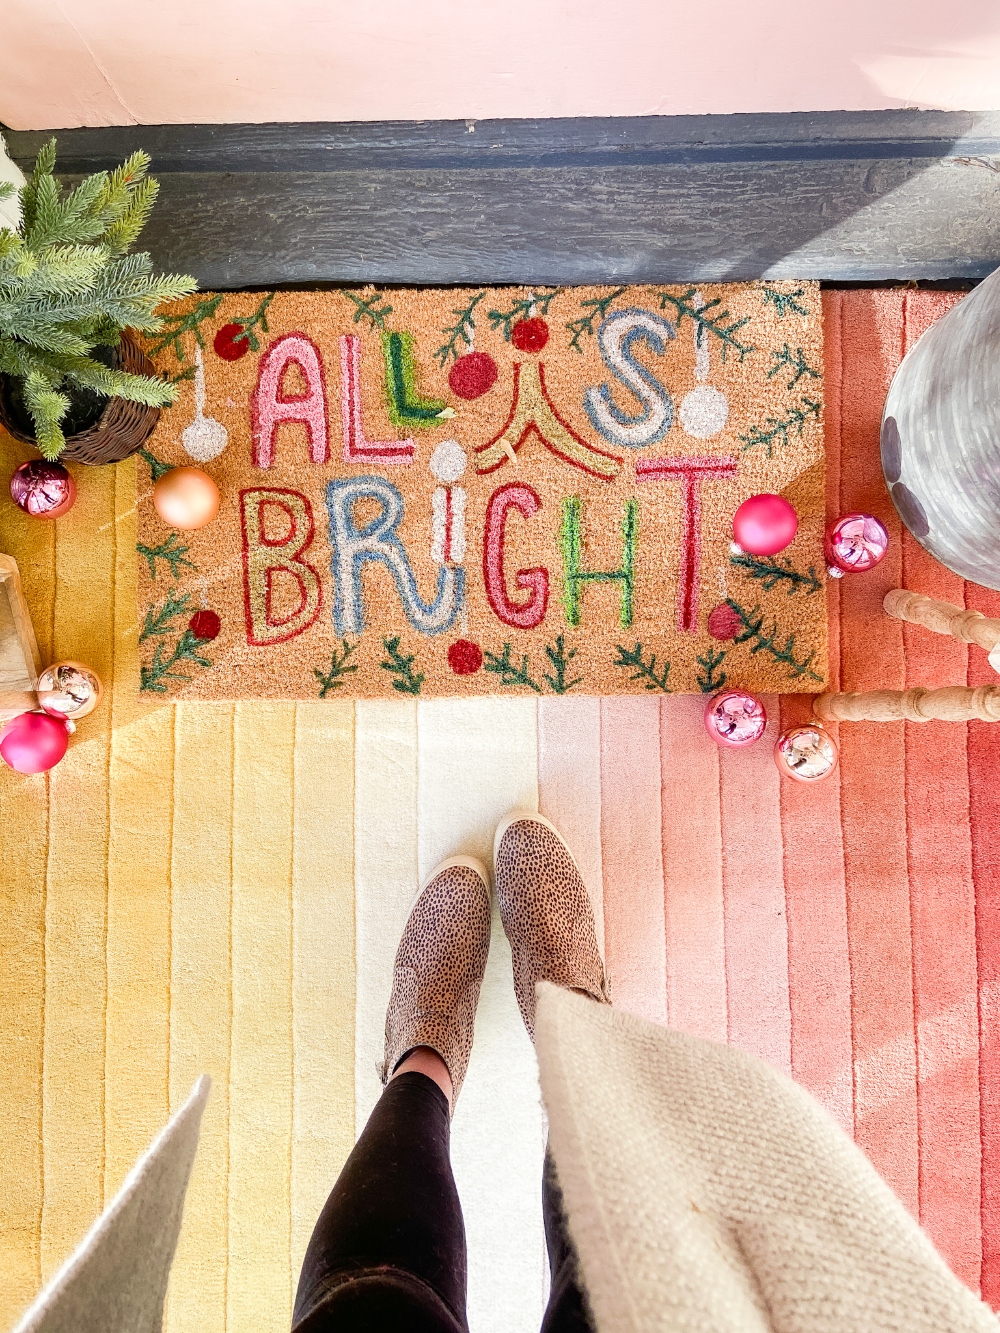 Love this Anthro knockoff Christmas doormat